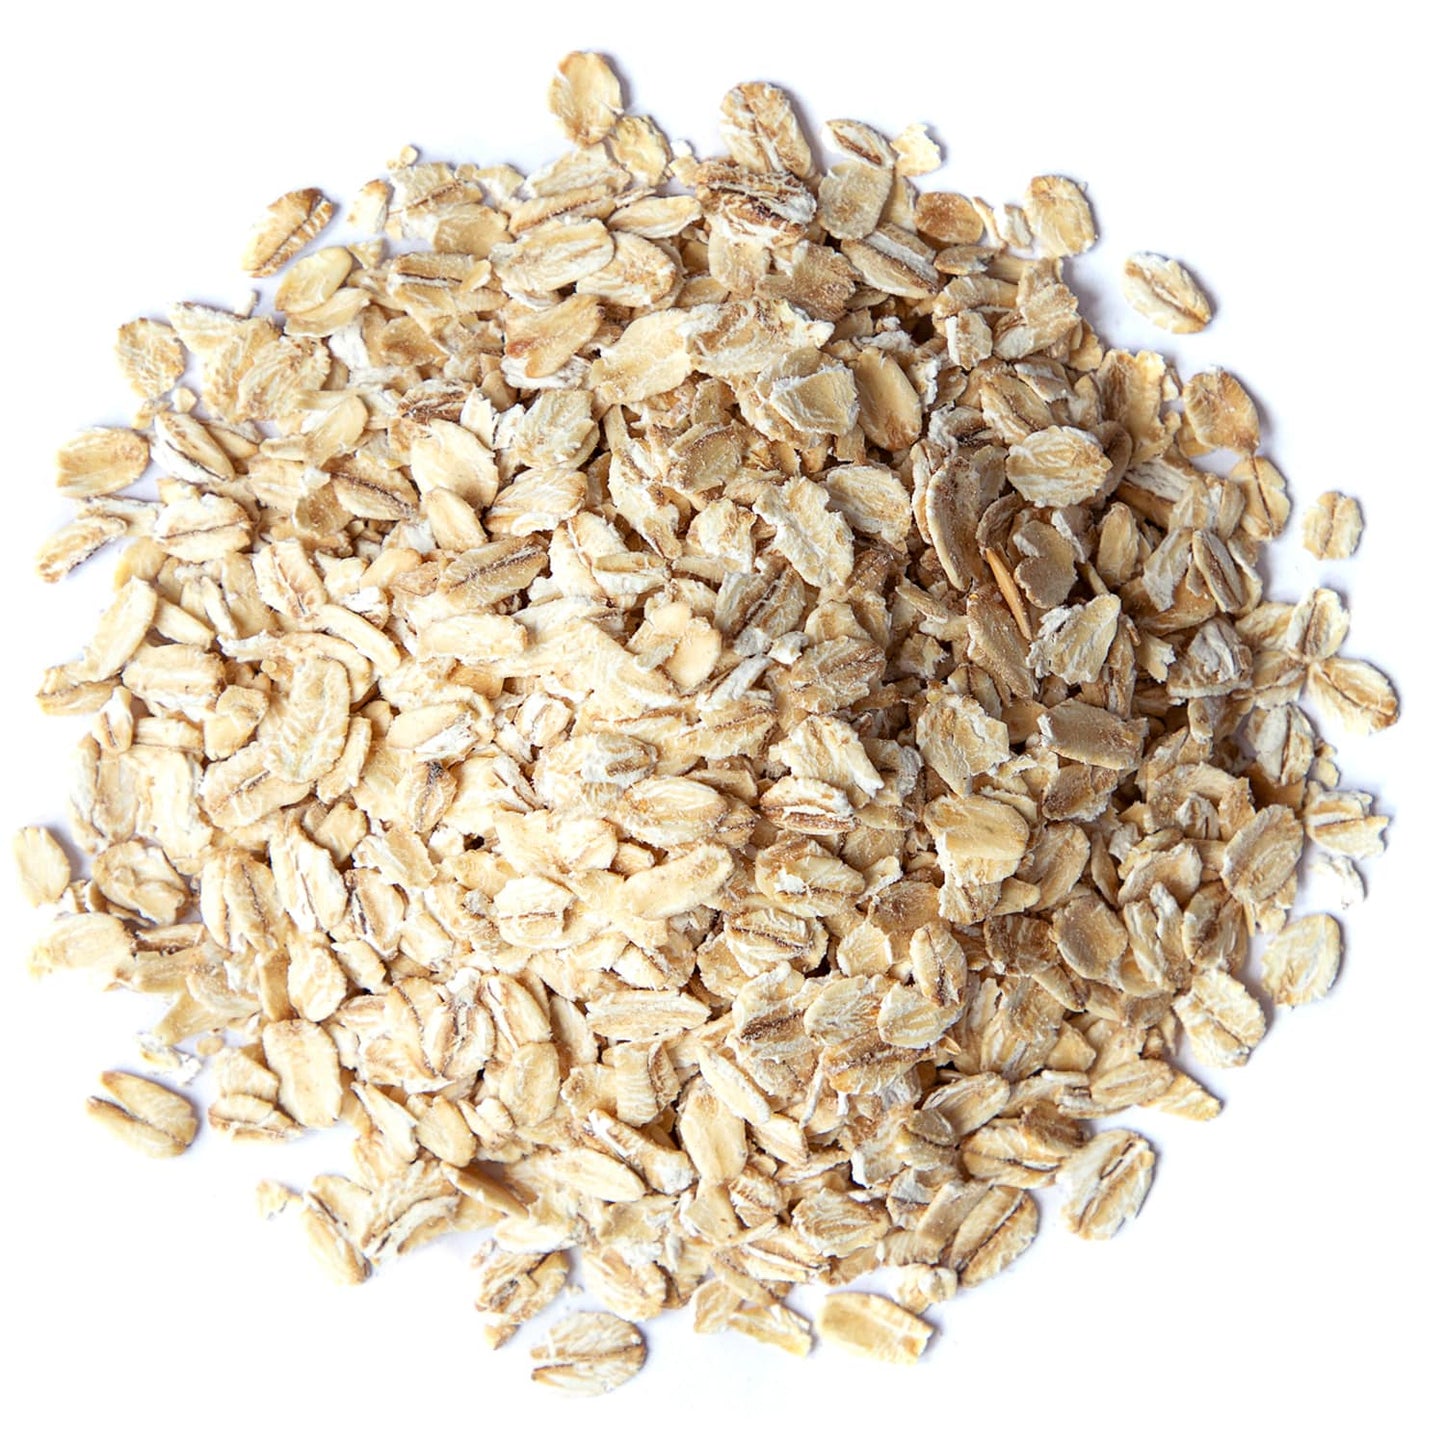 Quick Cooking Rolled Oats - 1 Minute Oatmeal, Non-GMO Verified, Whole Grain, Instant Meal, Dry Thin Flakes, Uncooked, Kosher, Great for Cereal and Granola